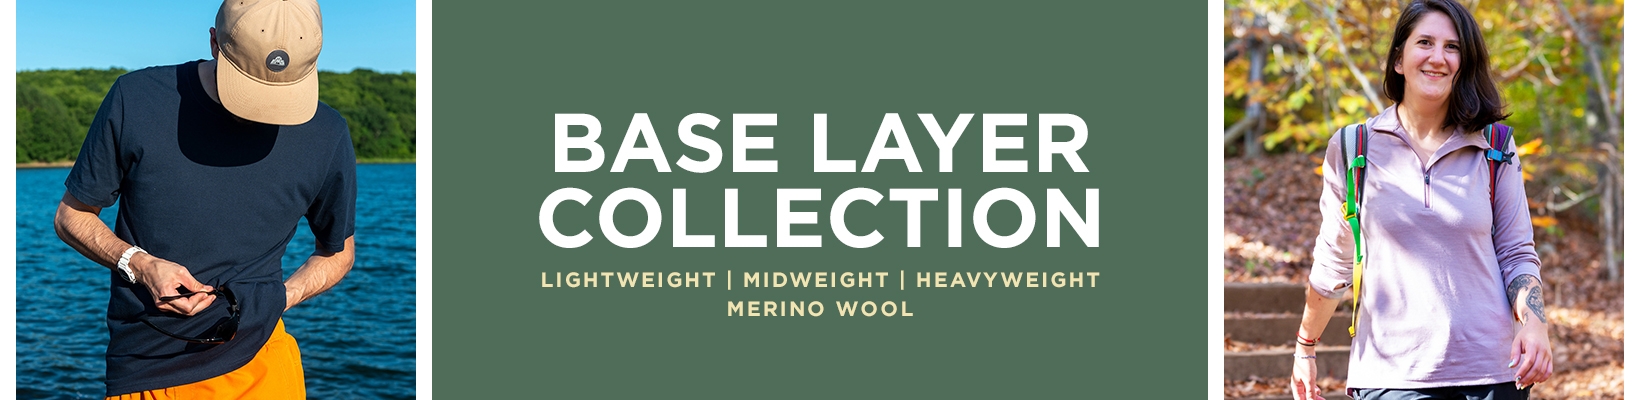 Base Layer Collection